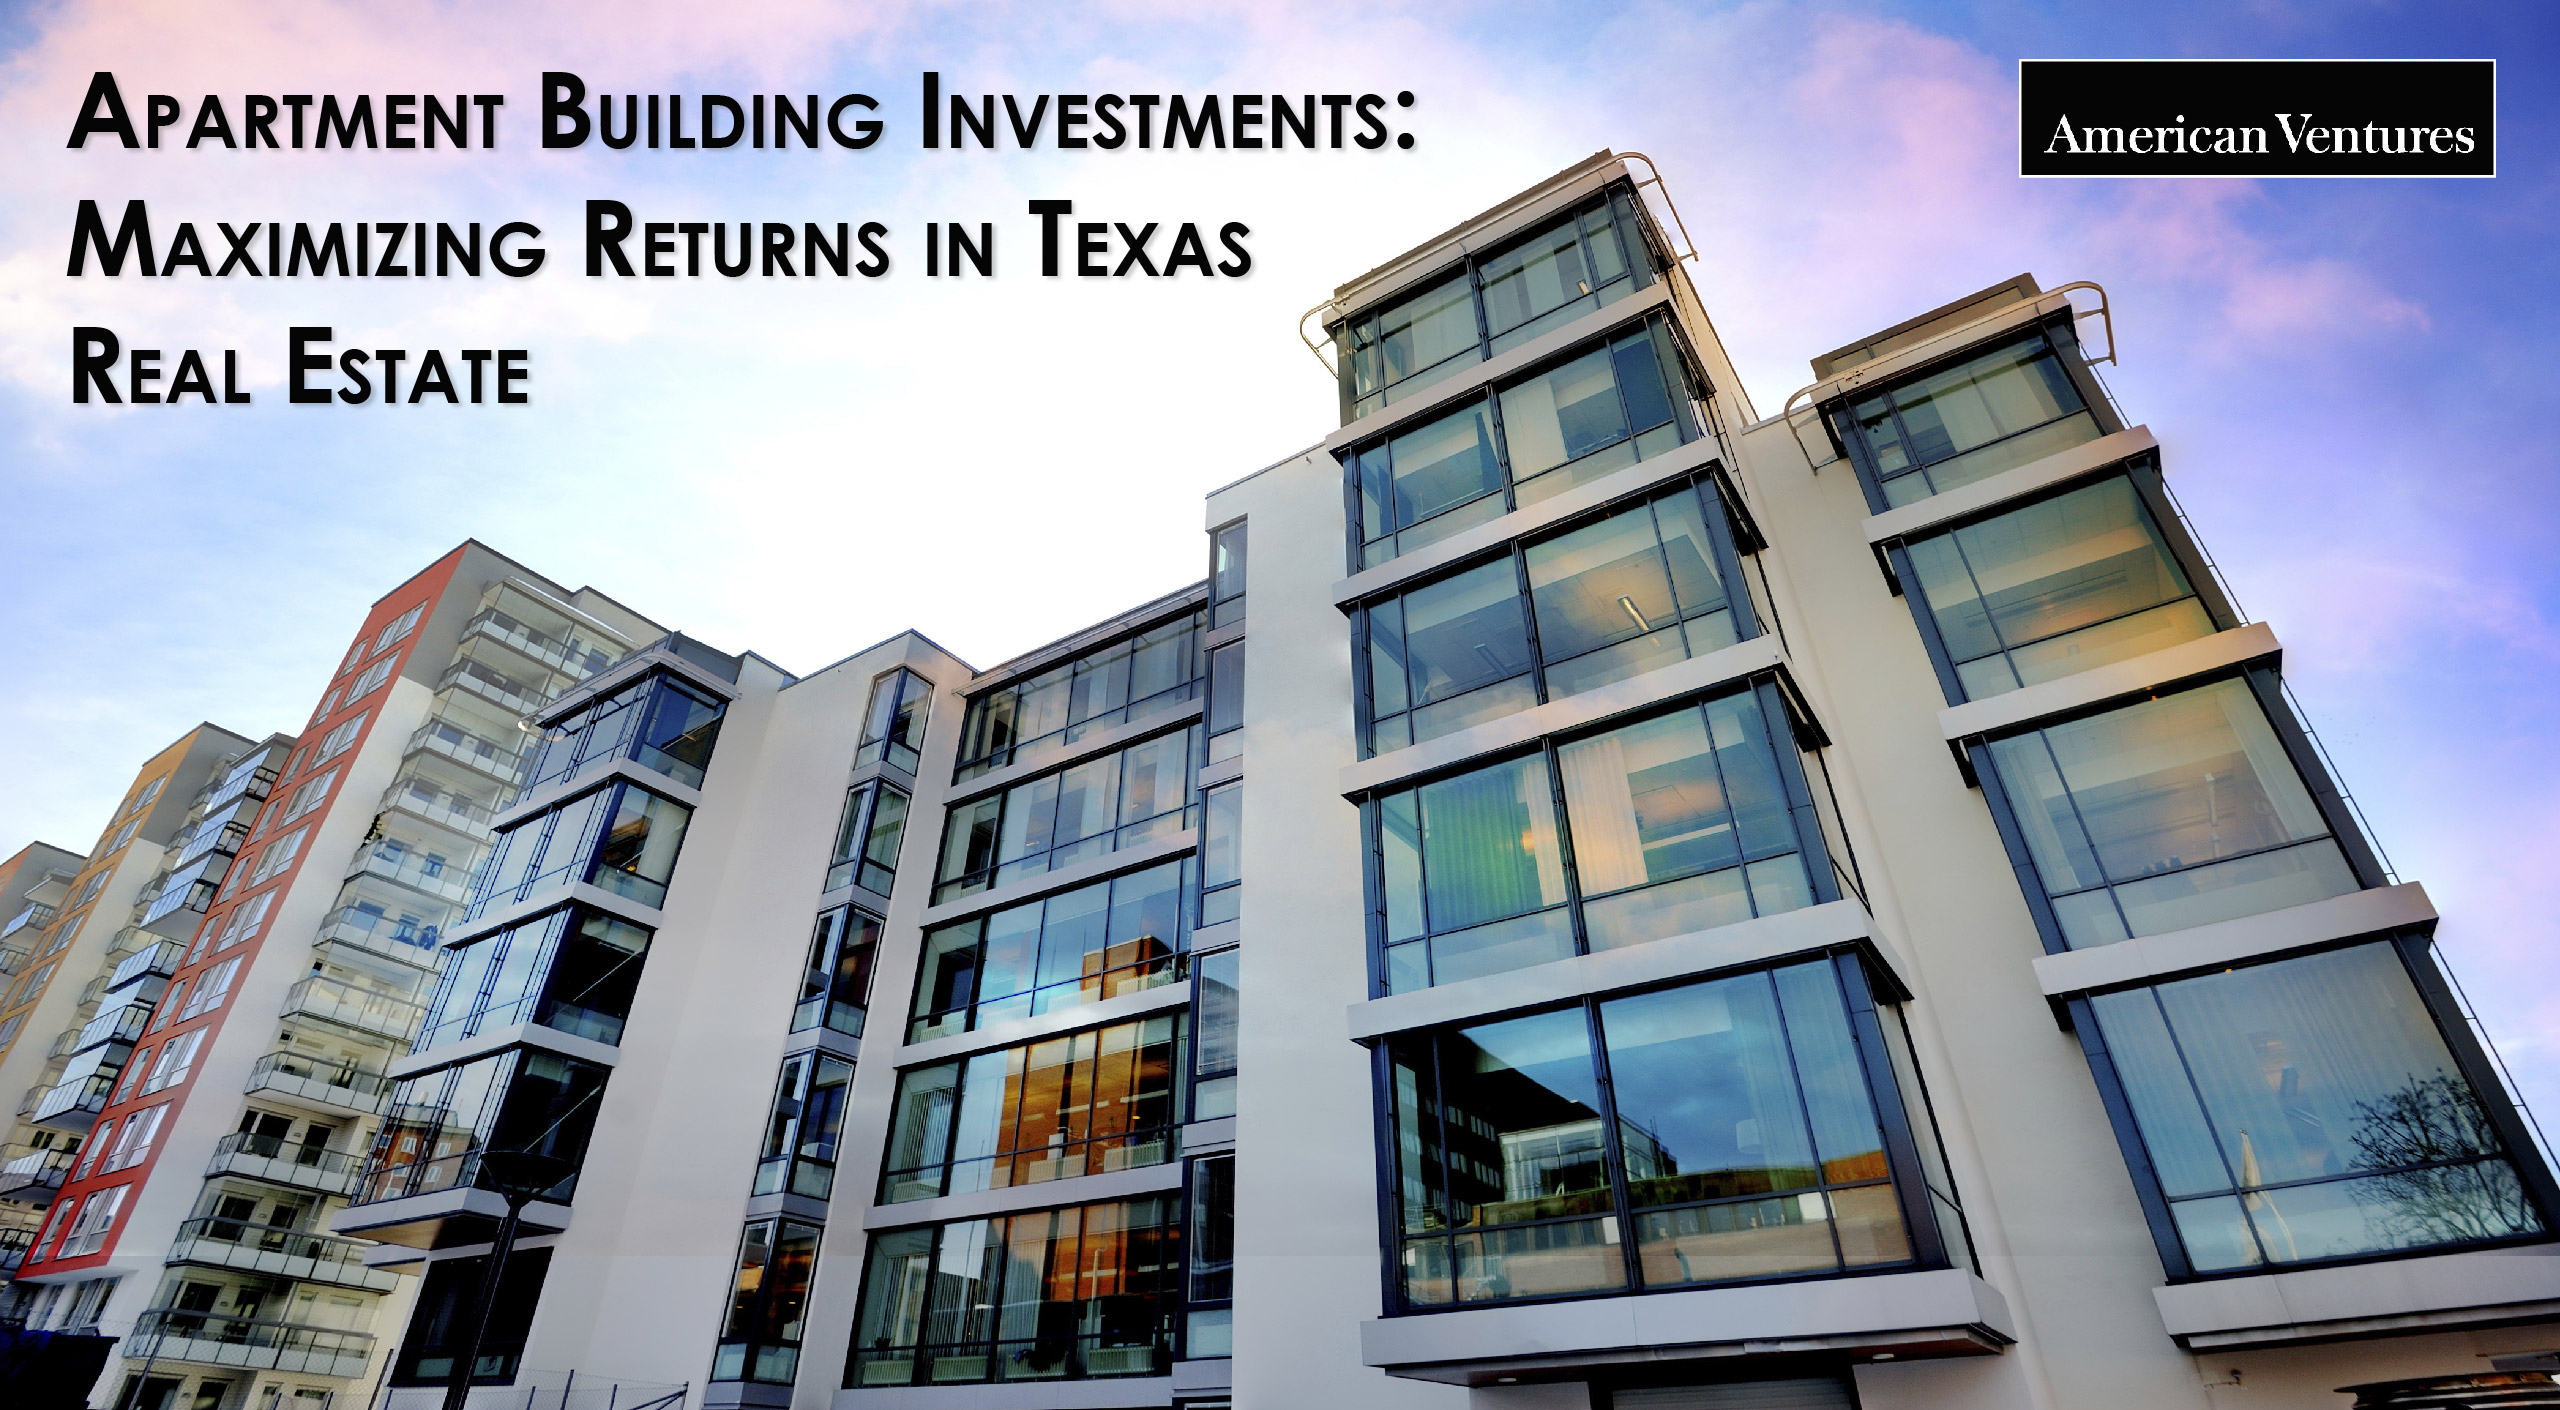 Apartment Building Investments: Maximizing Returns in Texas Real Estate